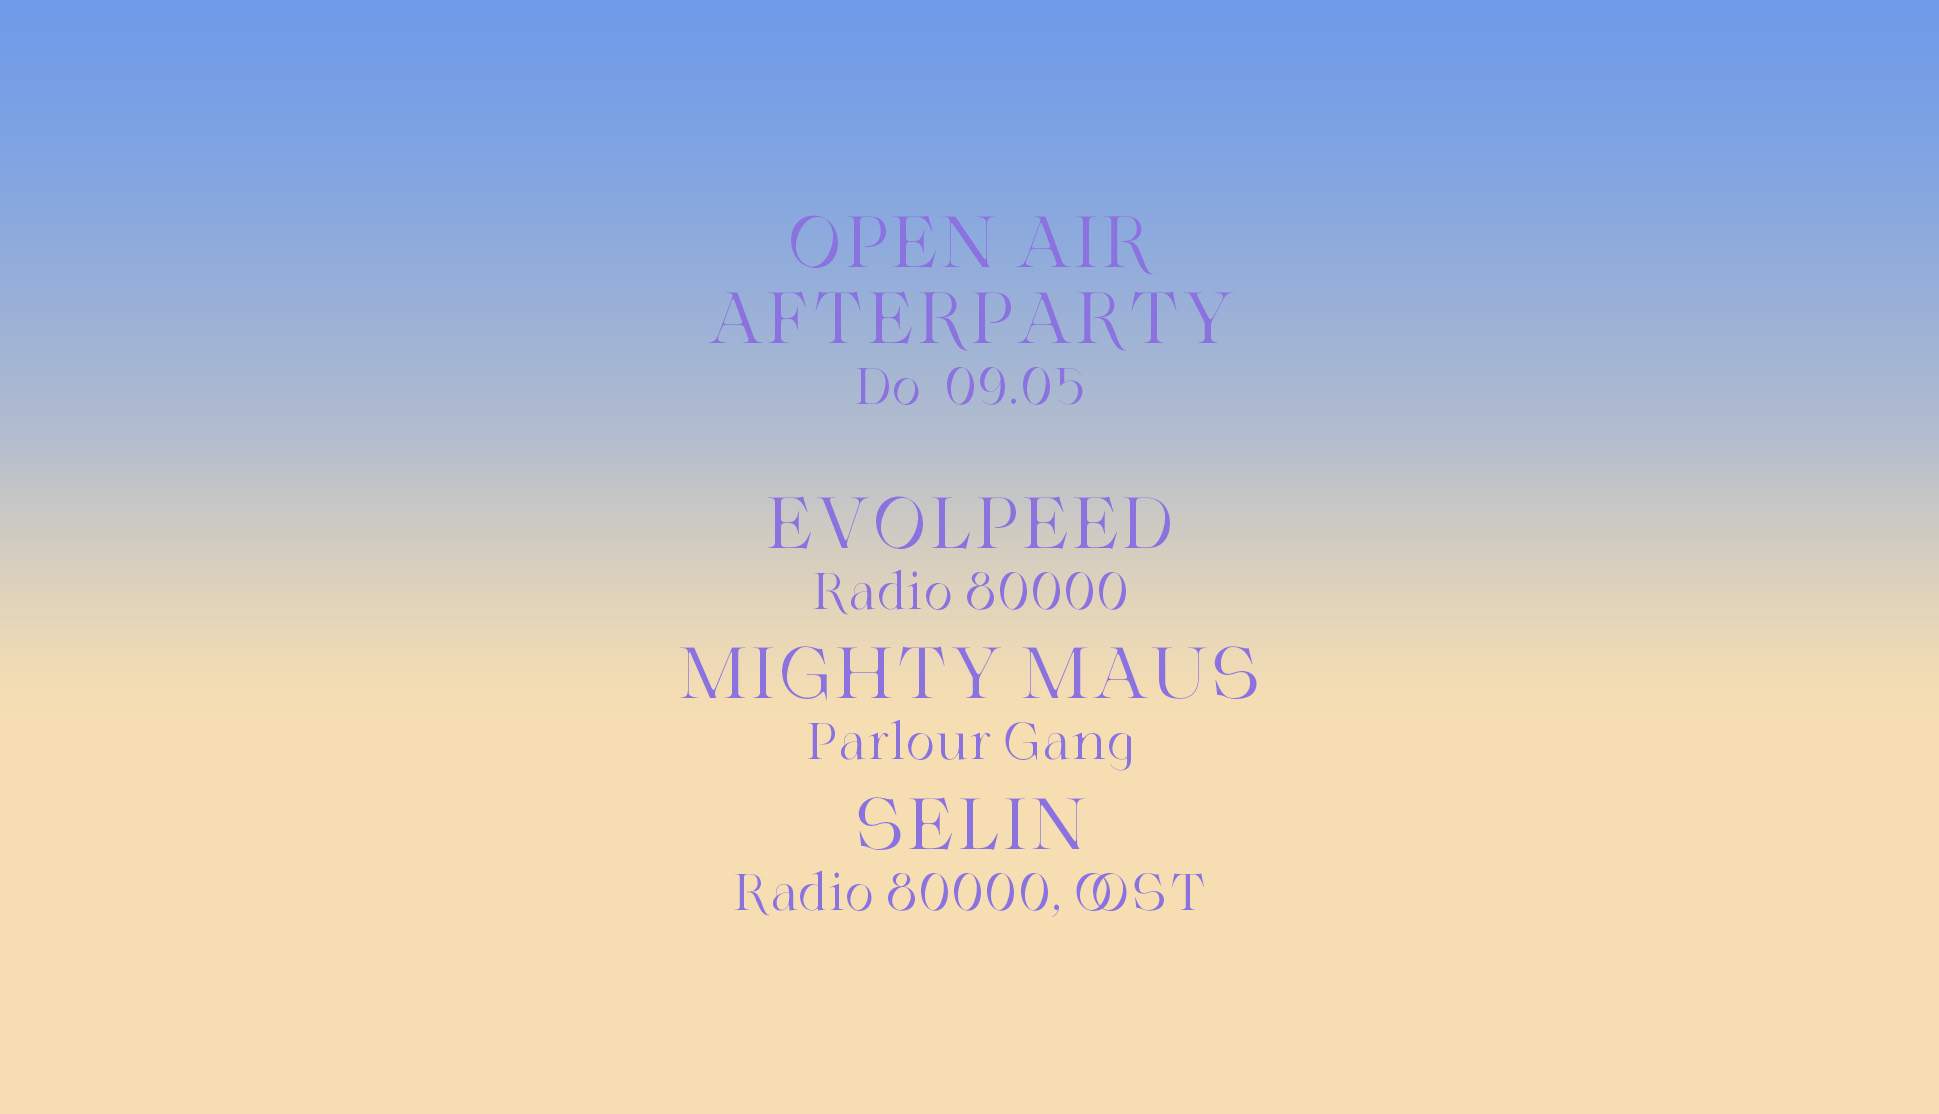 Open Air Afterparty with evolpeed, Mighty Maus & Selin - Página frontal